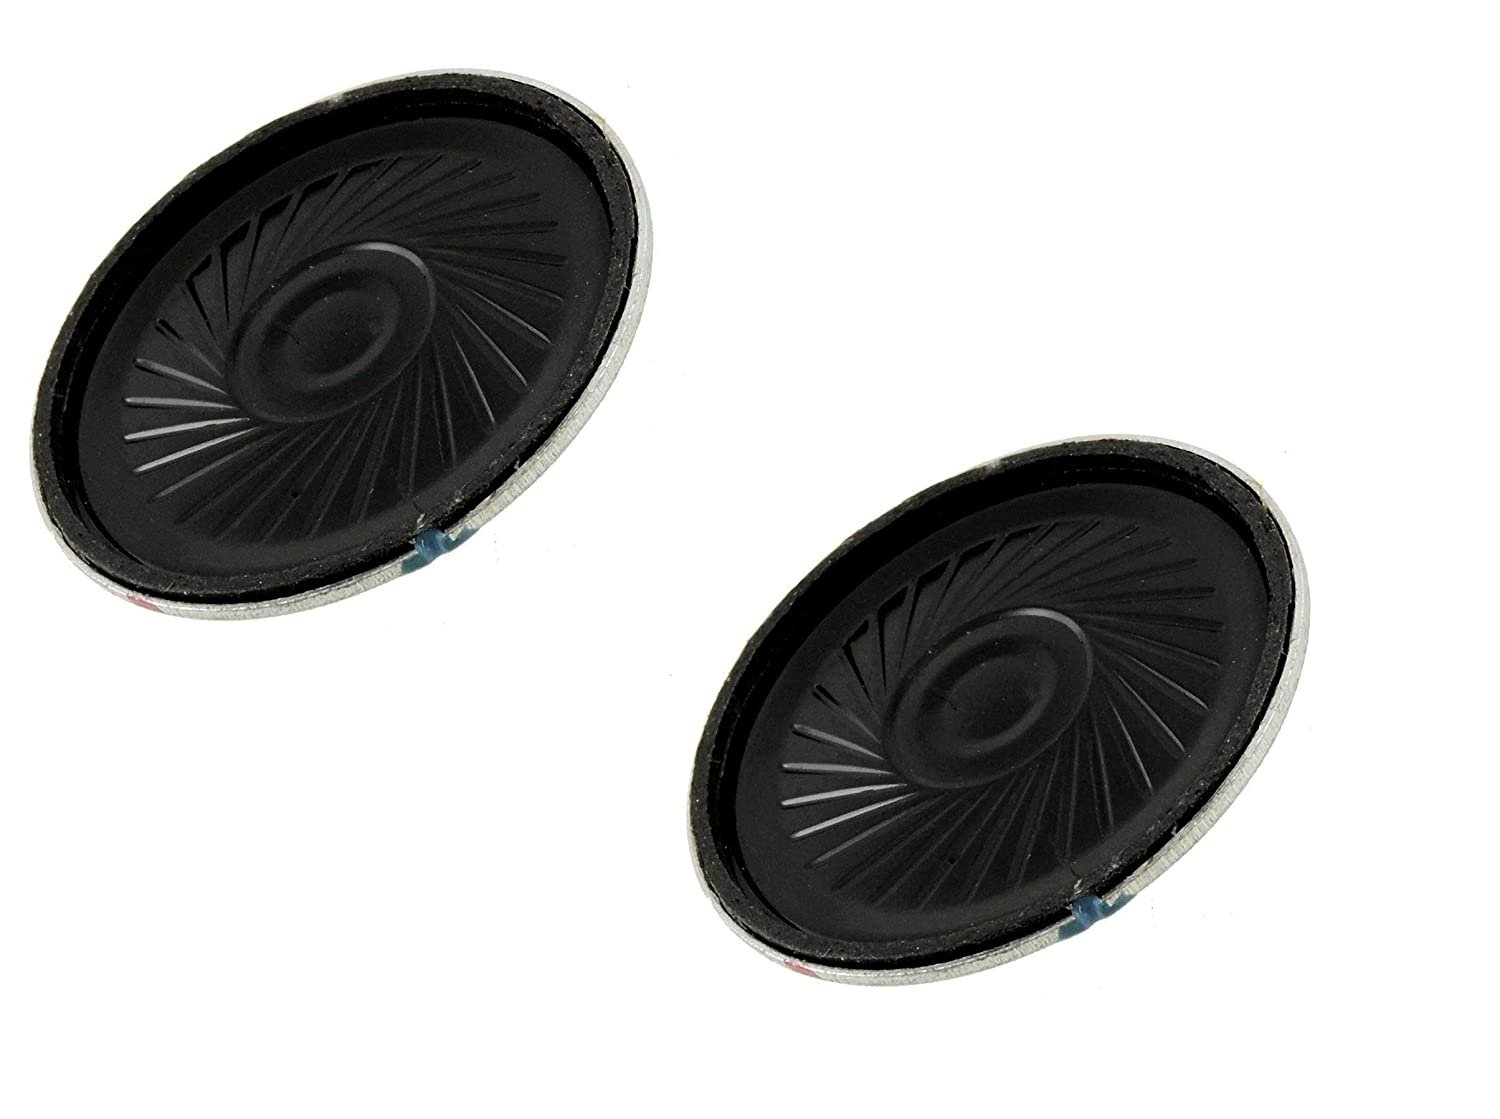  0.5W, 8 Ohm 40 mm Dia Magnetic Type Round Metal Shelled Horn Speaker for Digital Phone/Electronic Gifts - Pack of 2